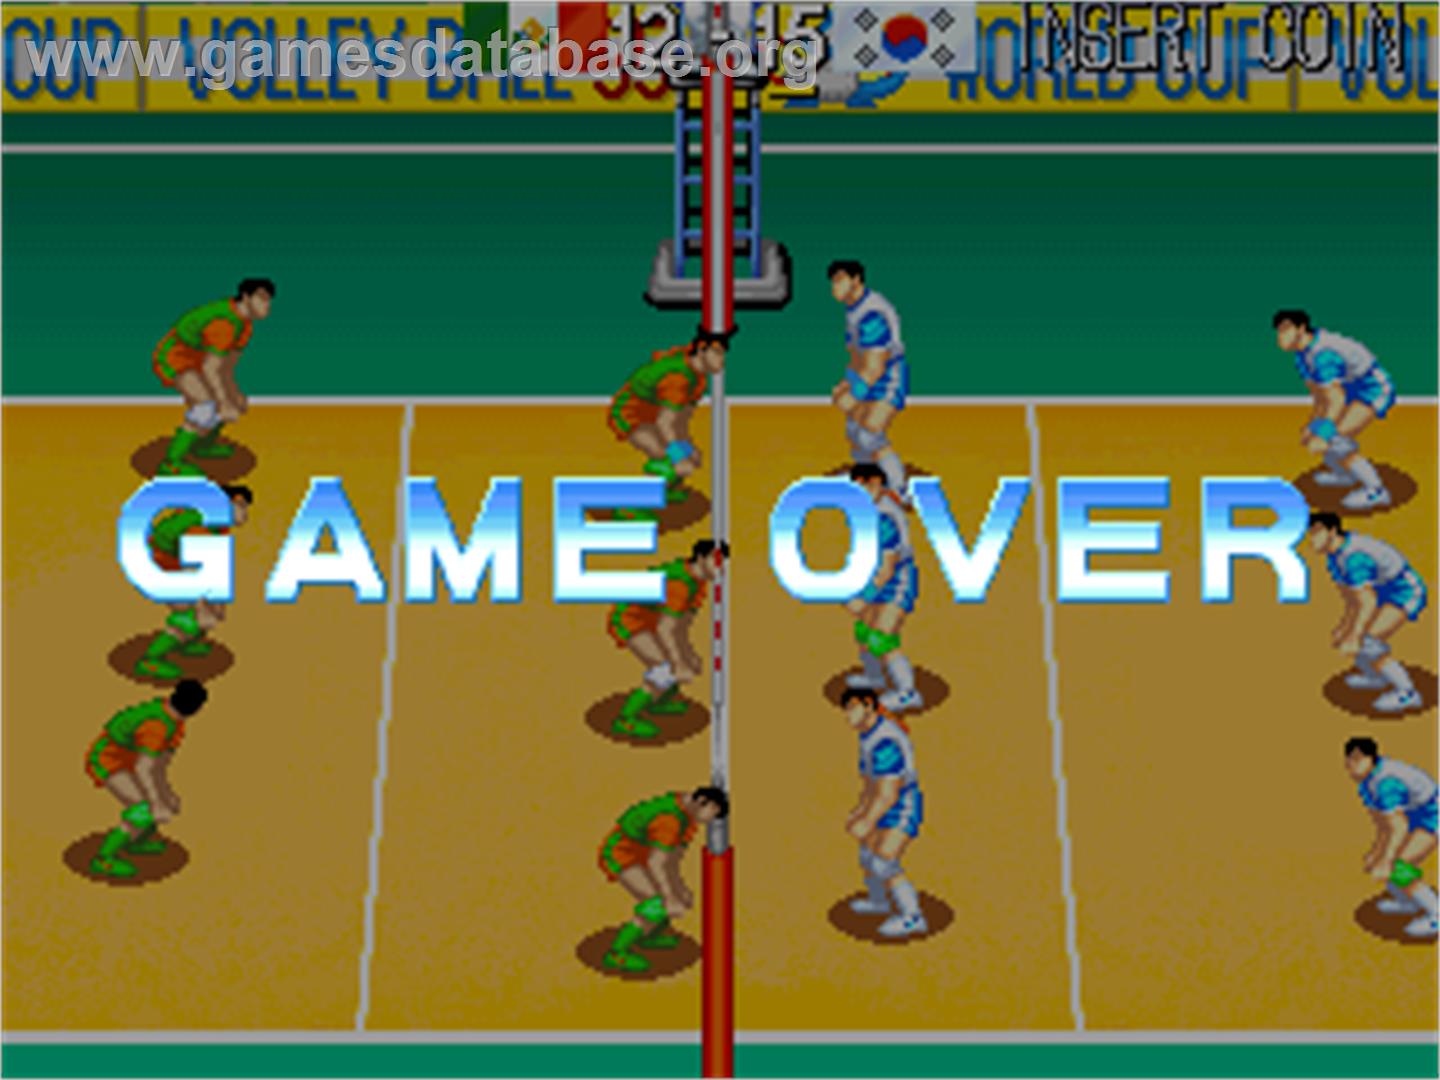 World Cup Volley '95 - Arcade - Artwork - Game Over Screen